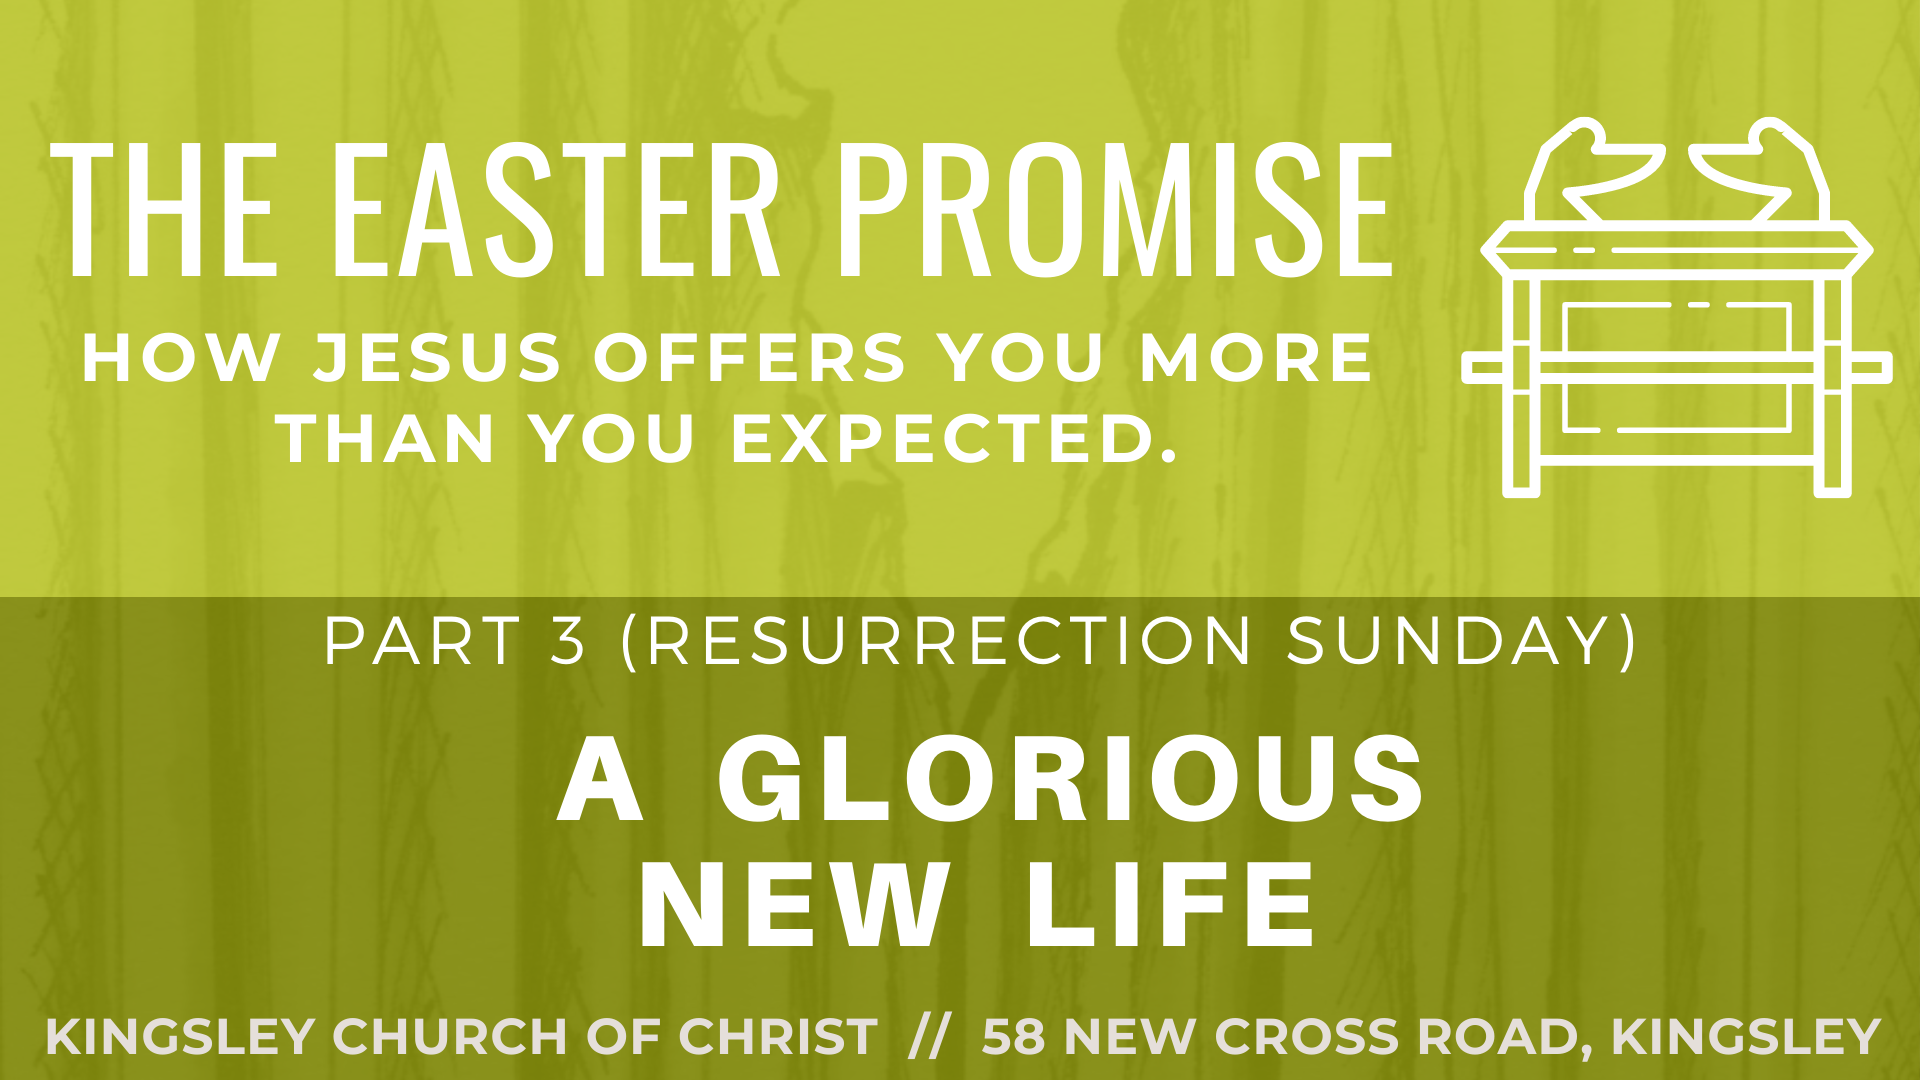 The Easter Promise Pt 3 - A Glorious New Life